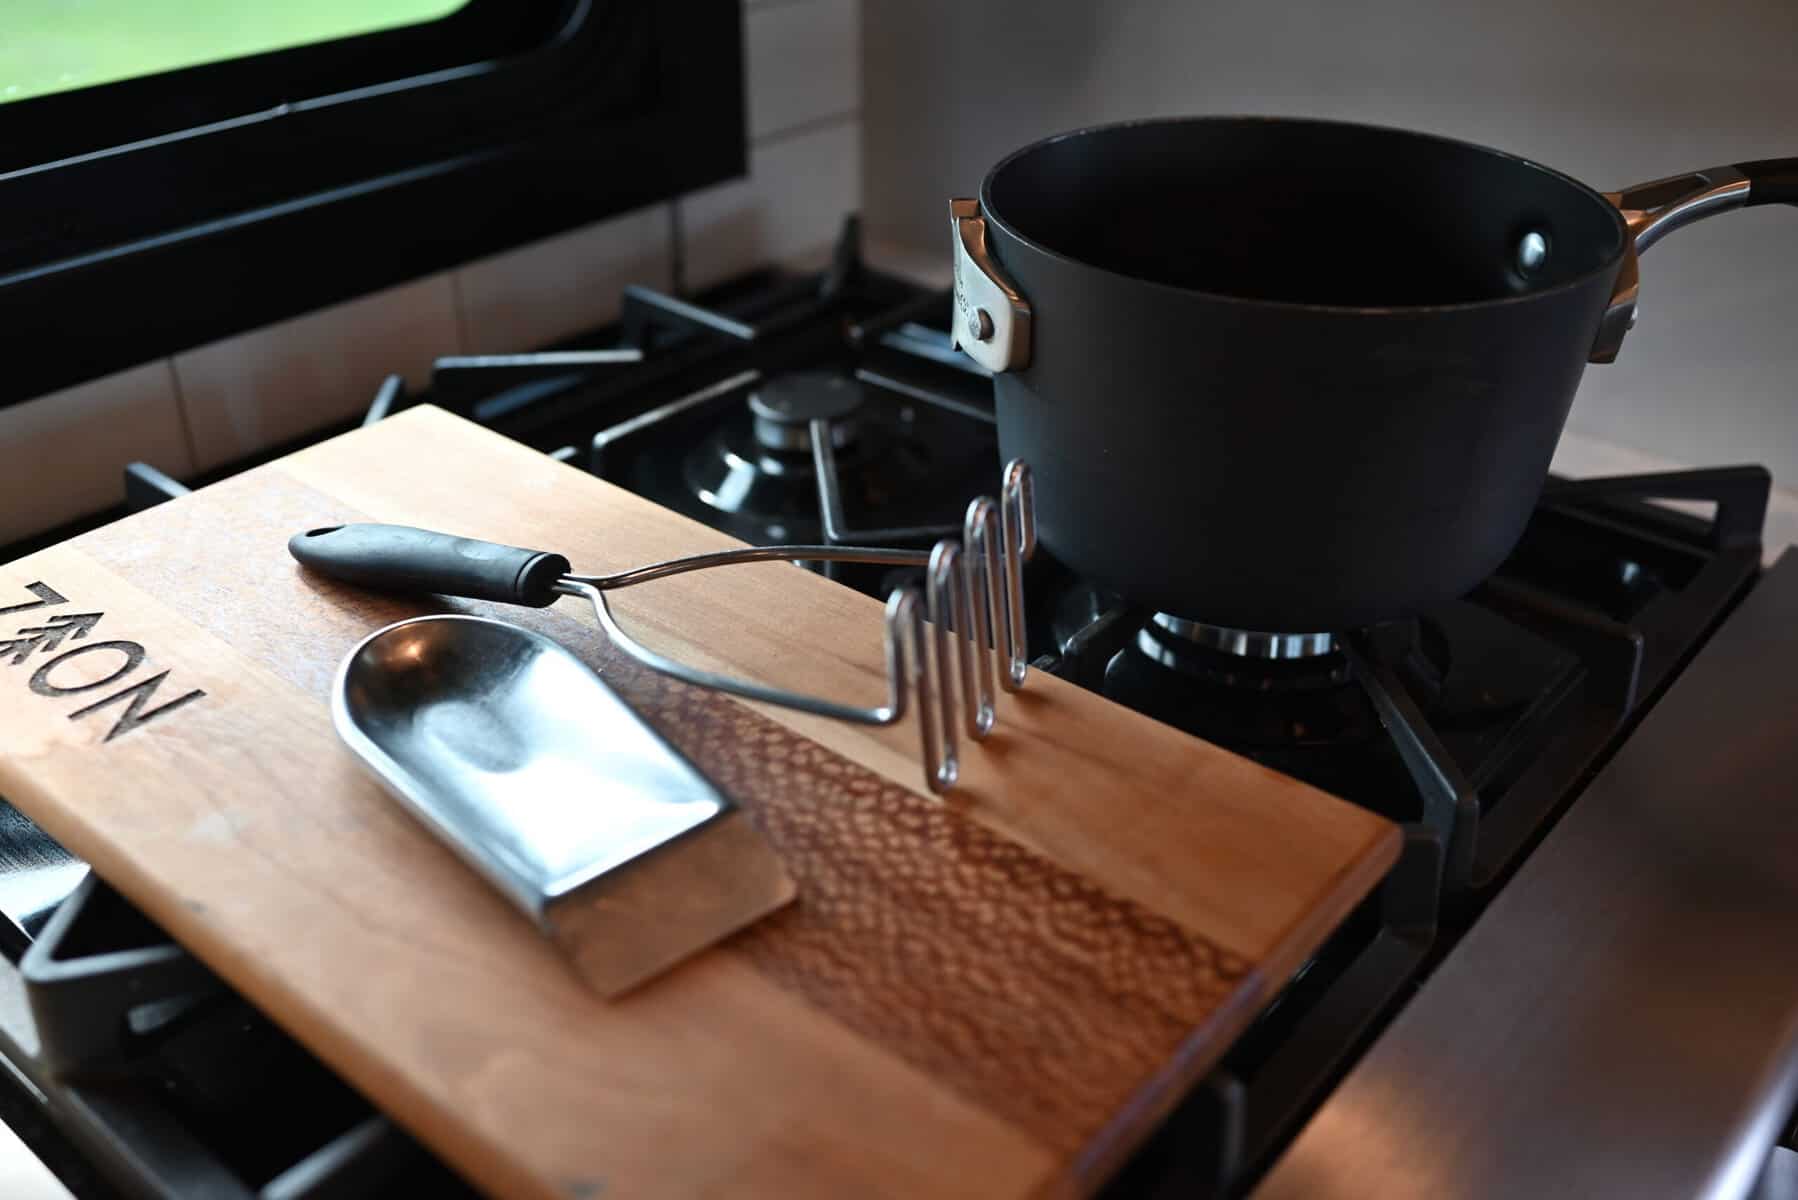 simmer pot on RV stove to remove cooking odors in your RV